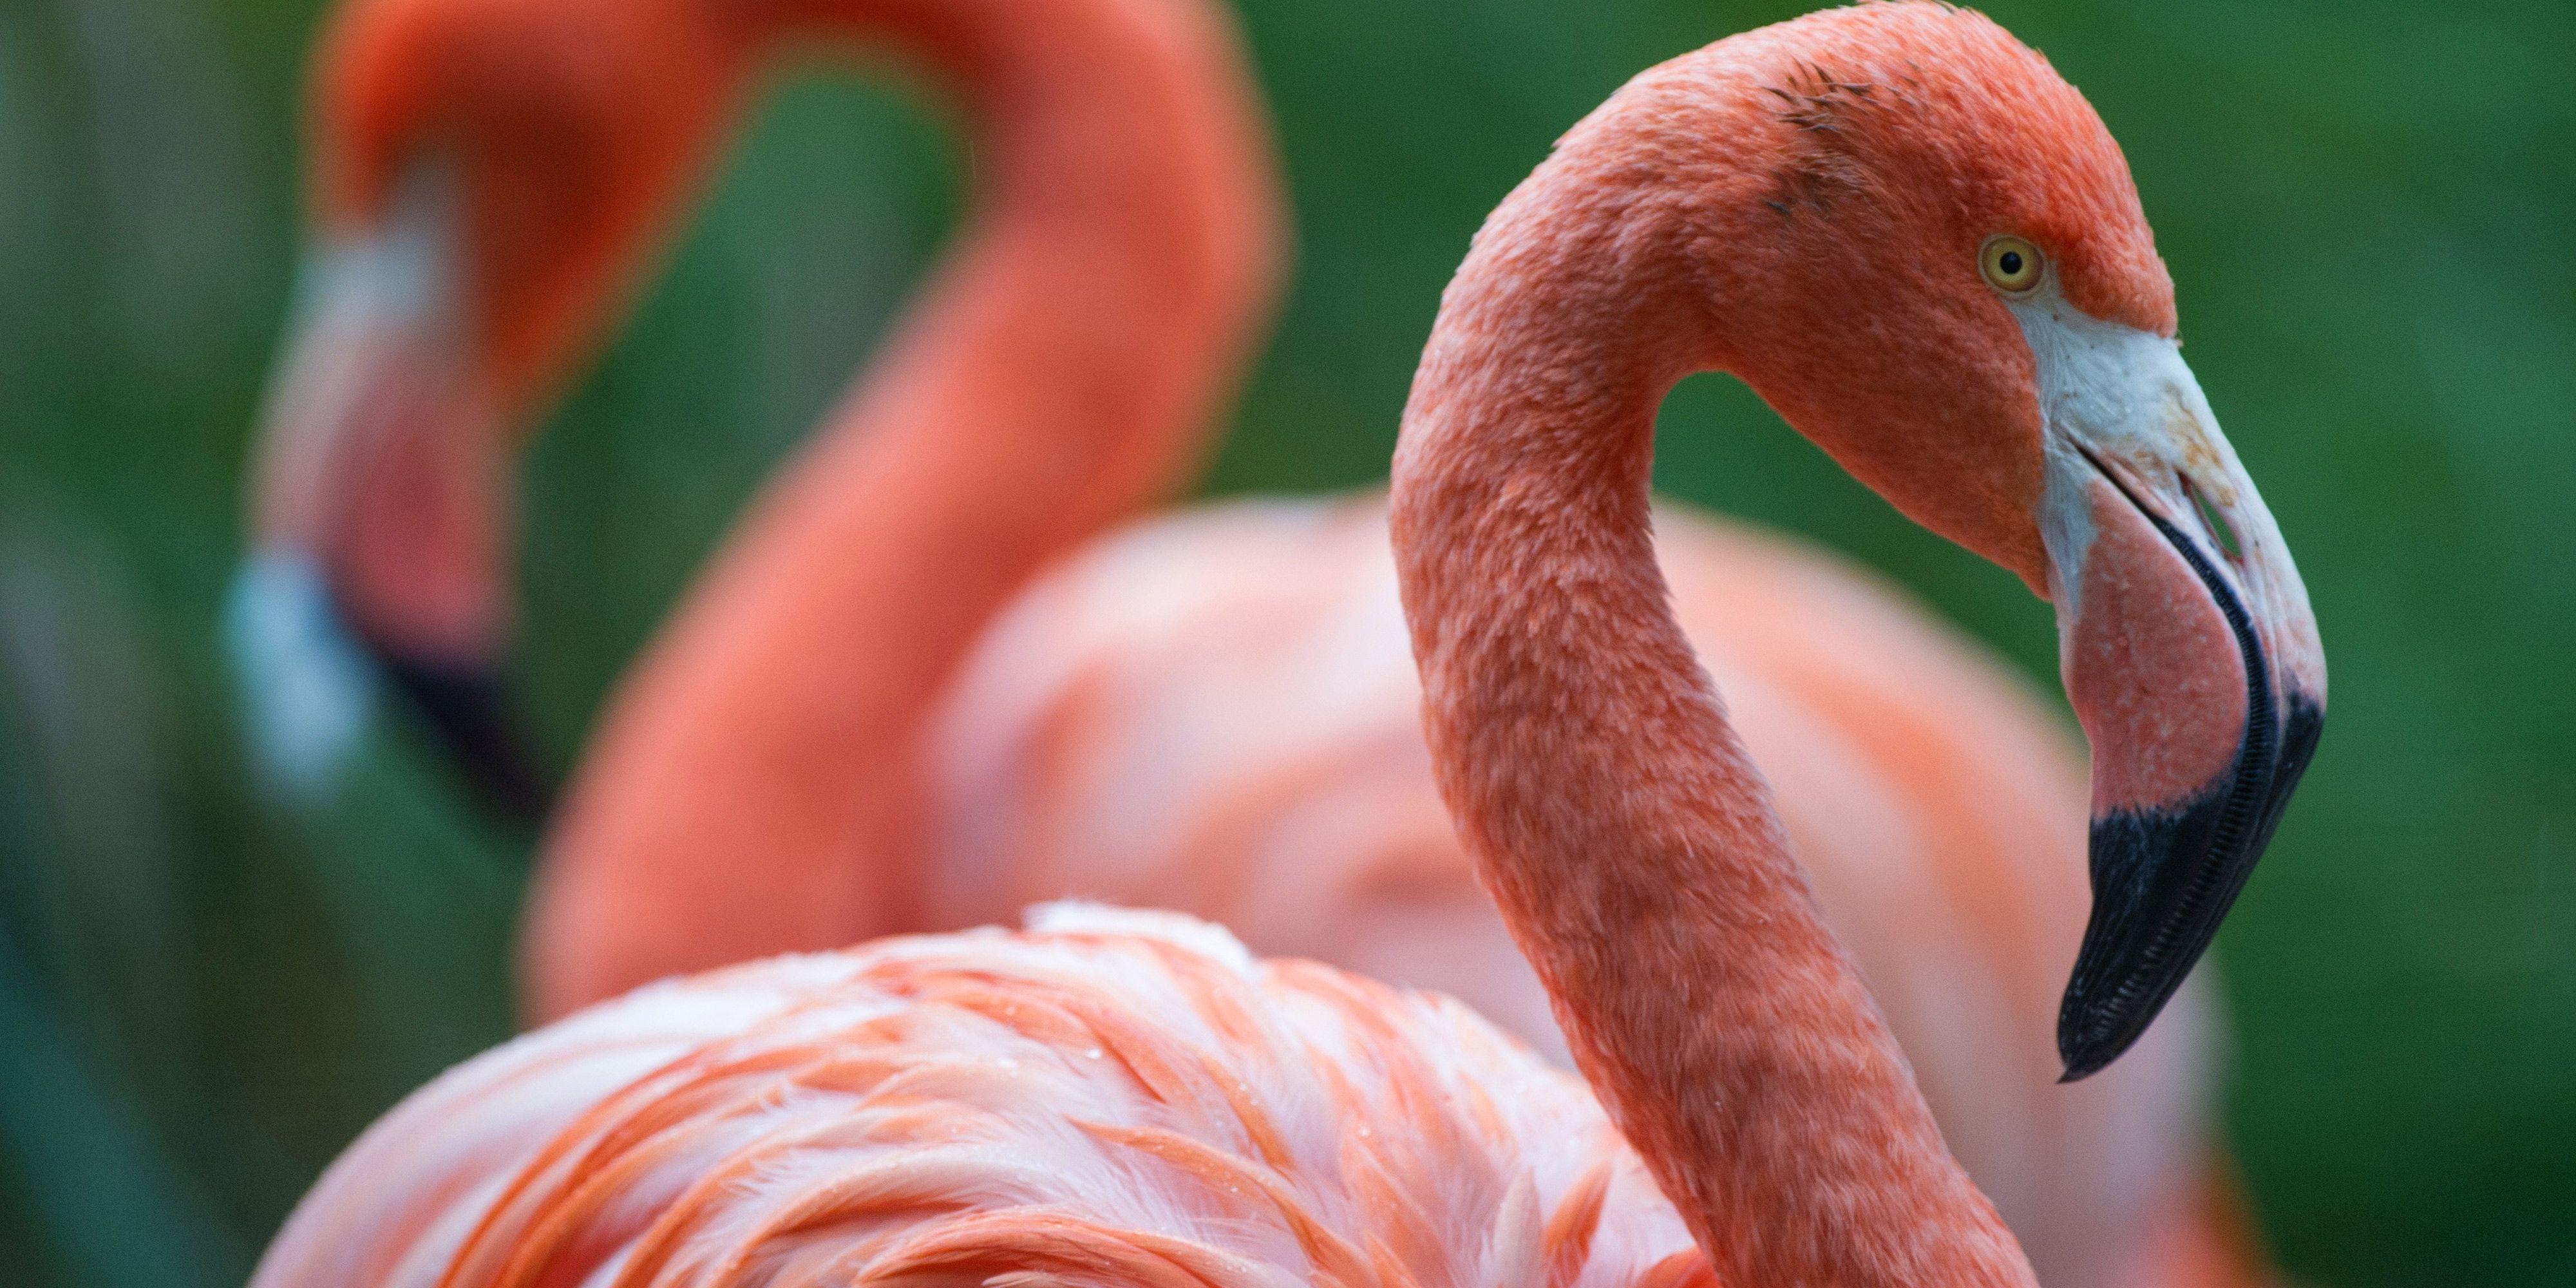 Fun Flamingo Facts You Didn't Know About Flamingos